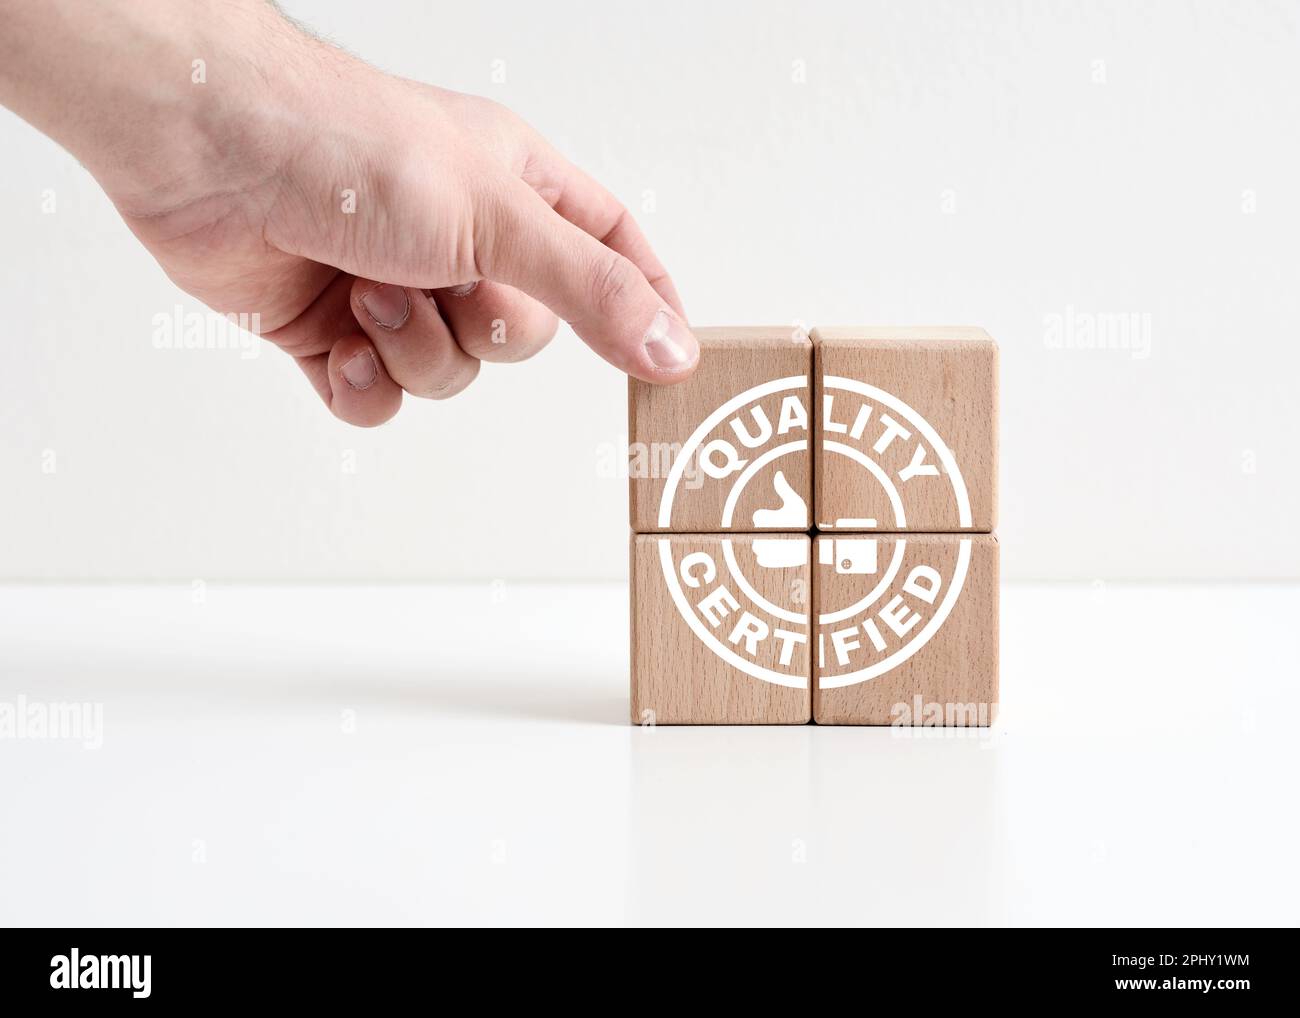 Quality certified concept. Business quality control and assurance. Warranty and meeting quality standards. Hand places wooden cubes with quality certi Stock Photo